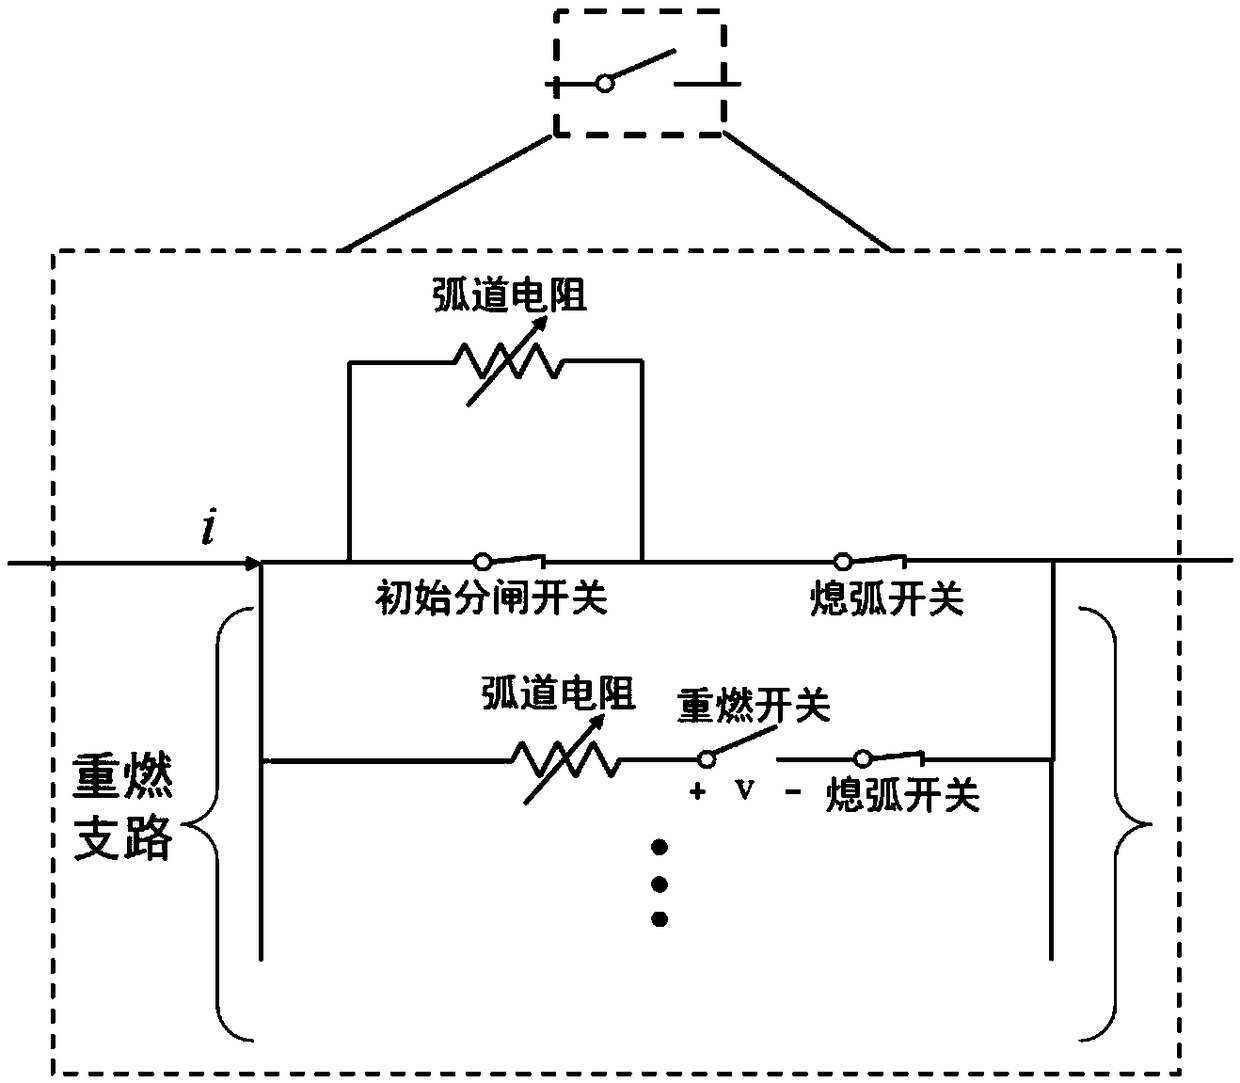 Power distribution network primary and secondary fusion intelligent switch high-frequency conduction interference test simulation method